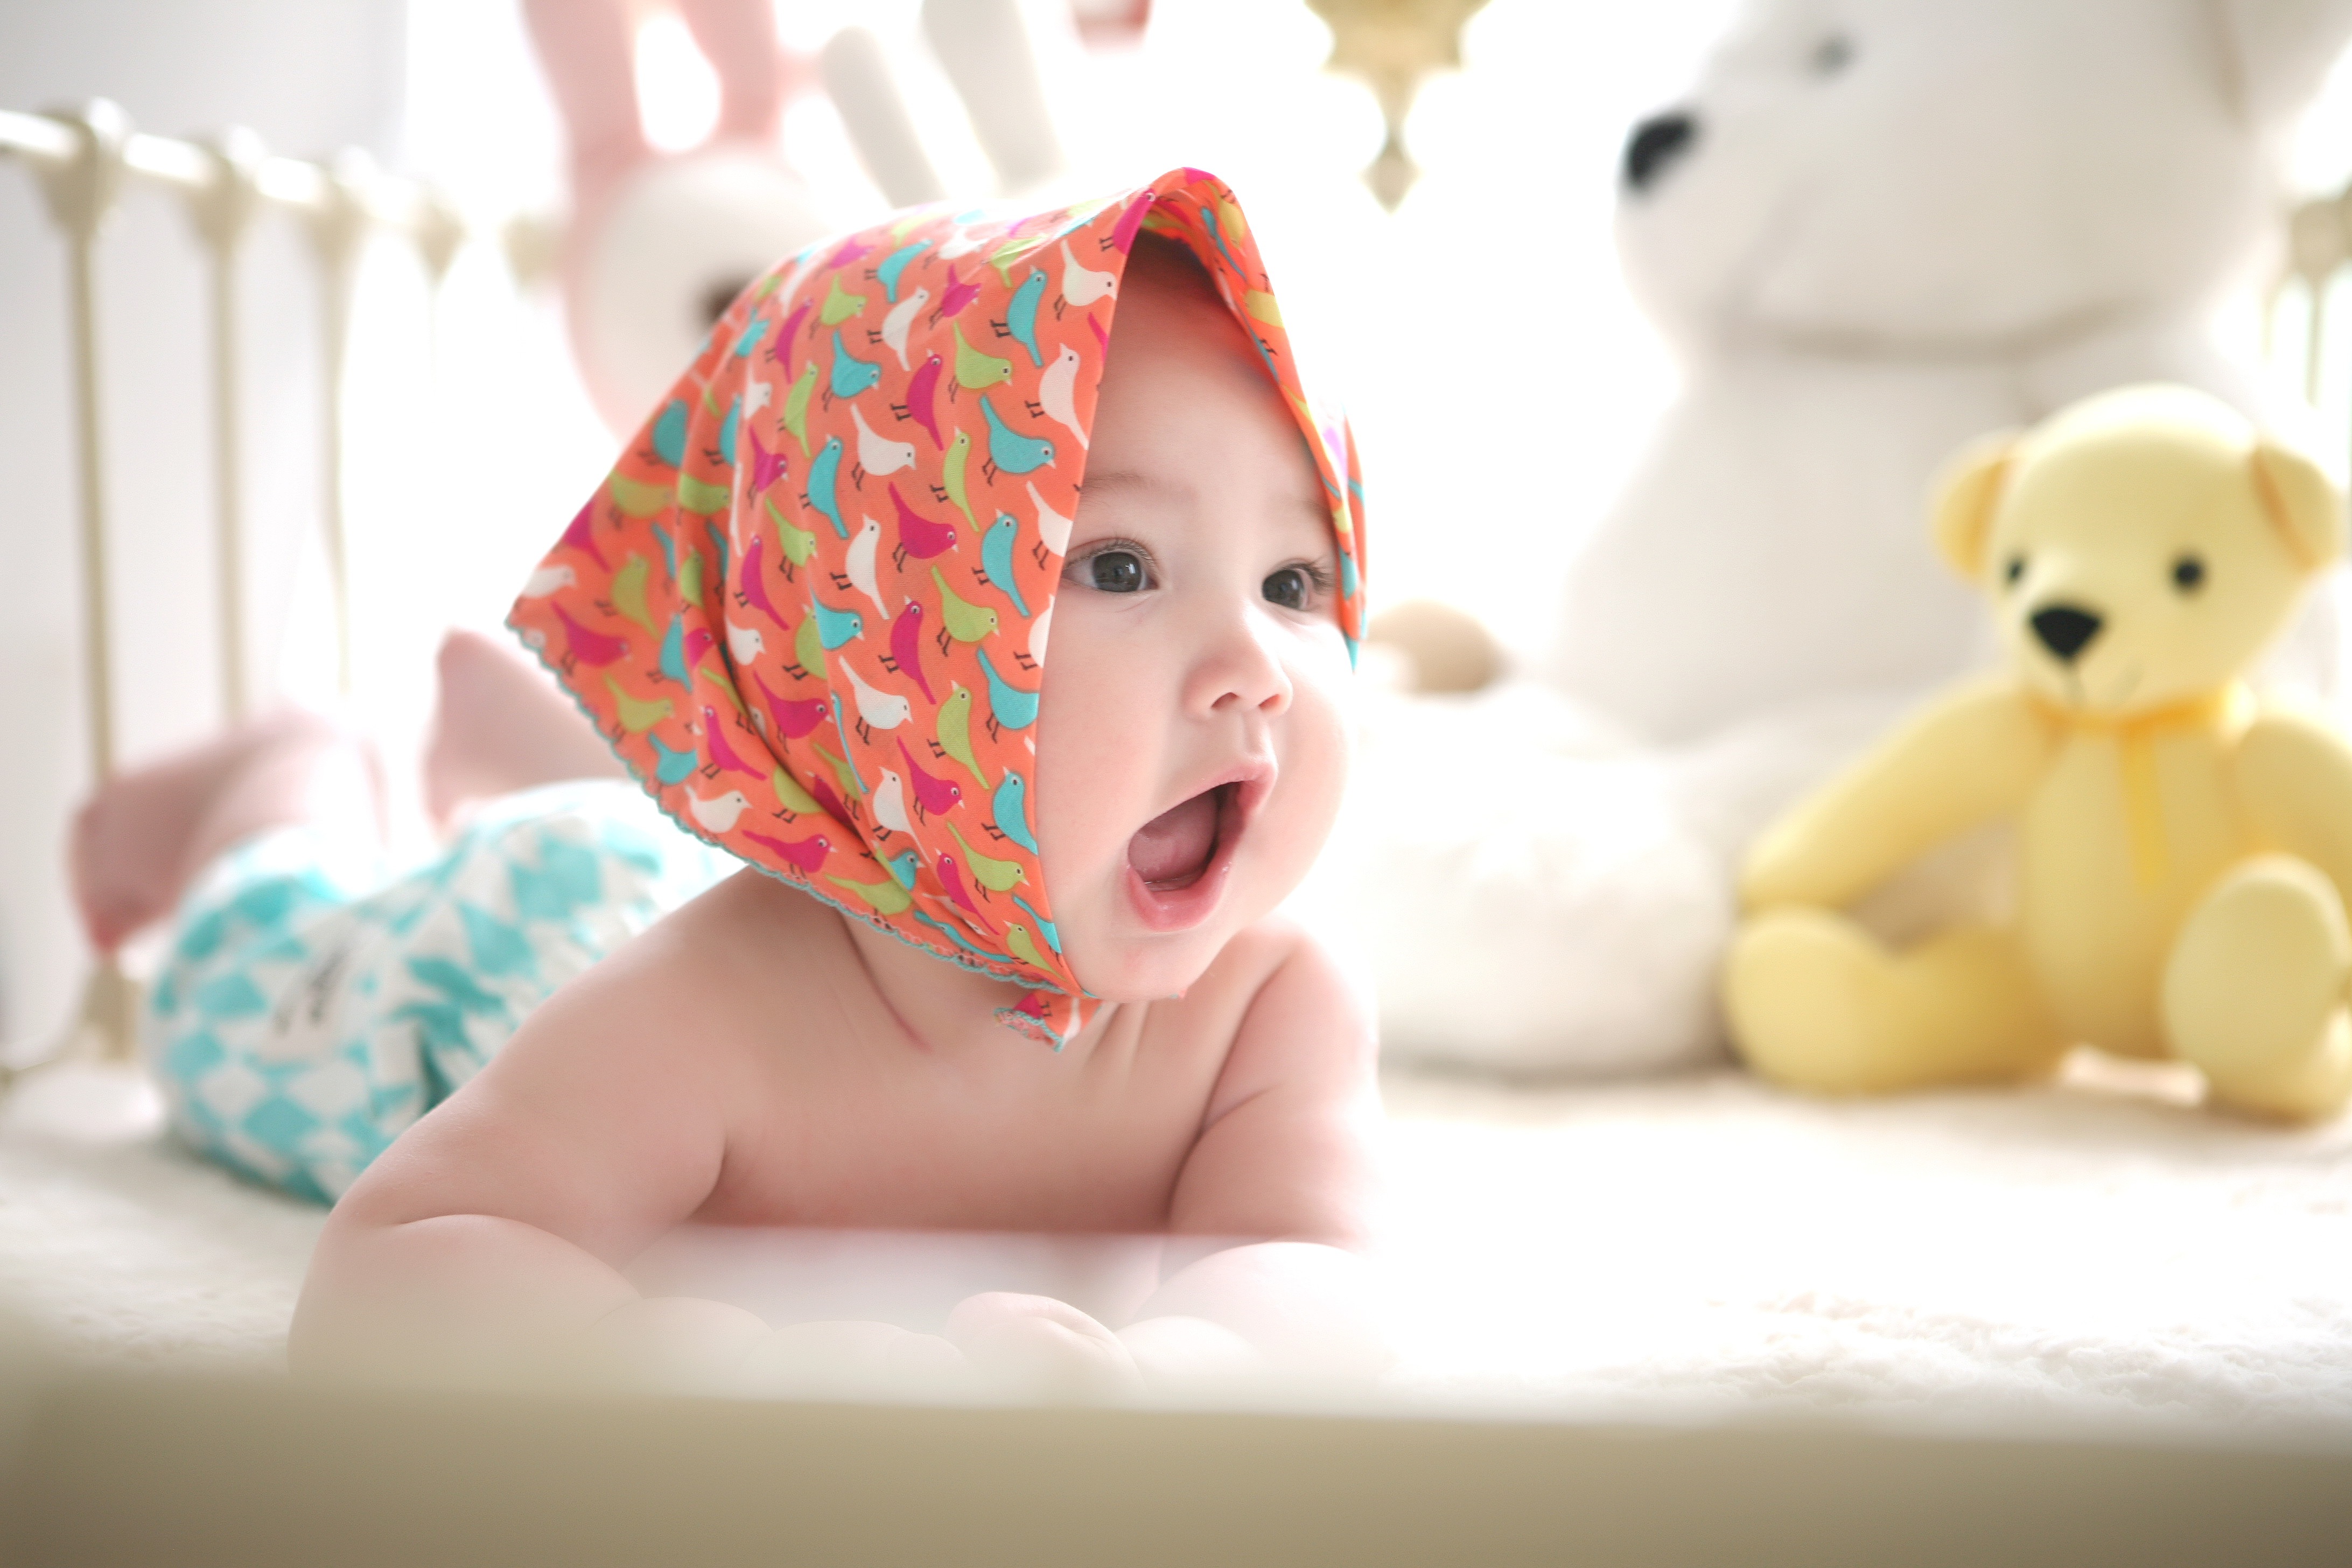 How to choose natural baby care products